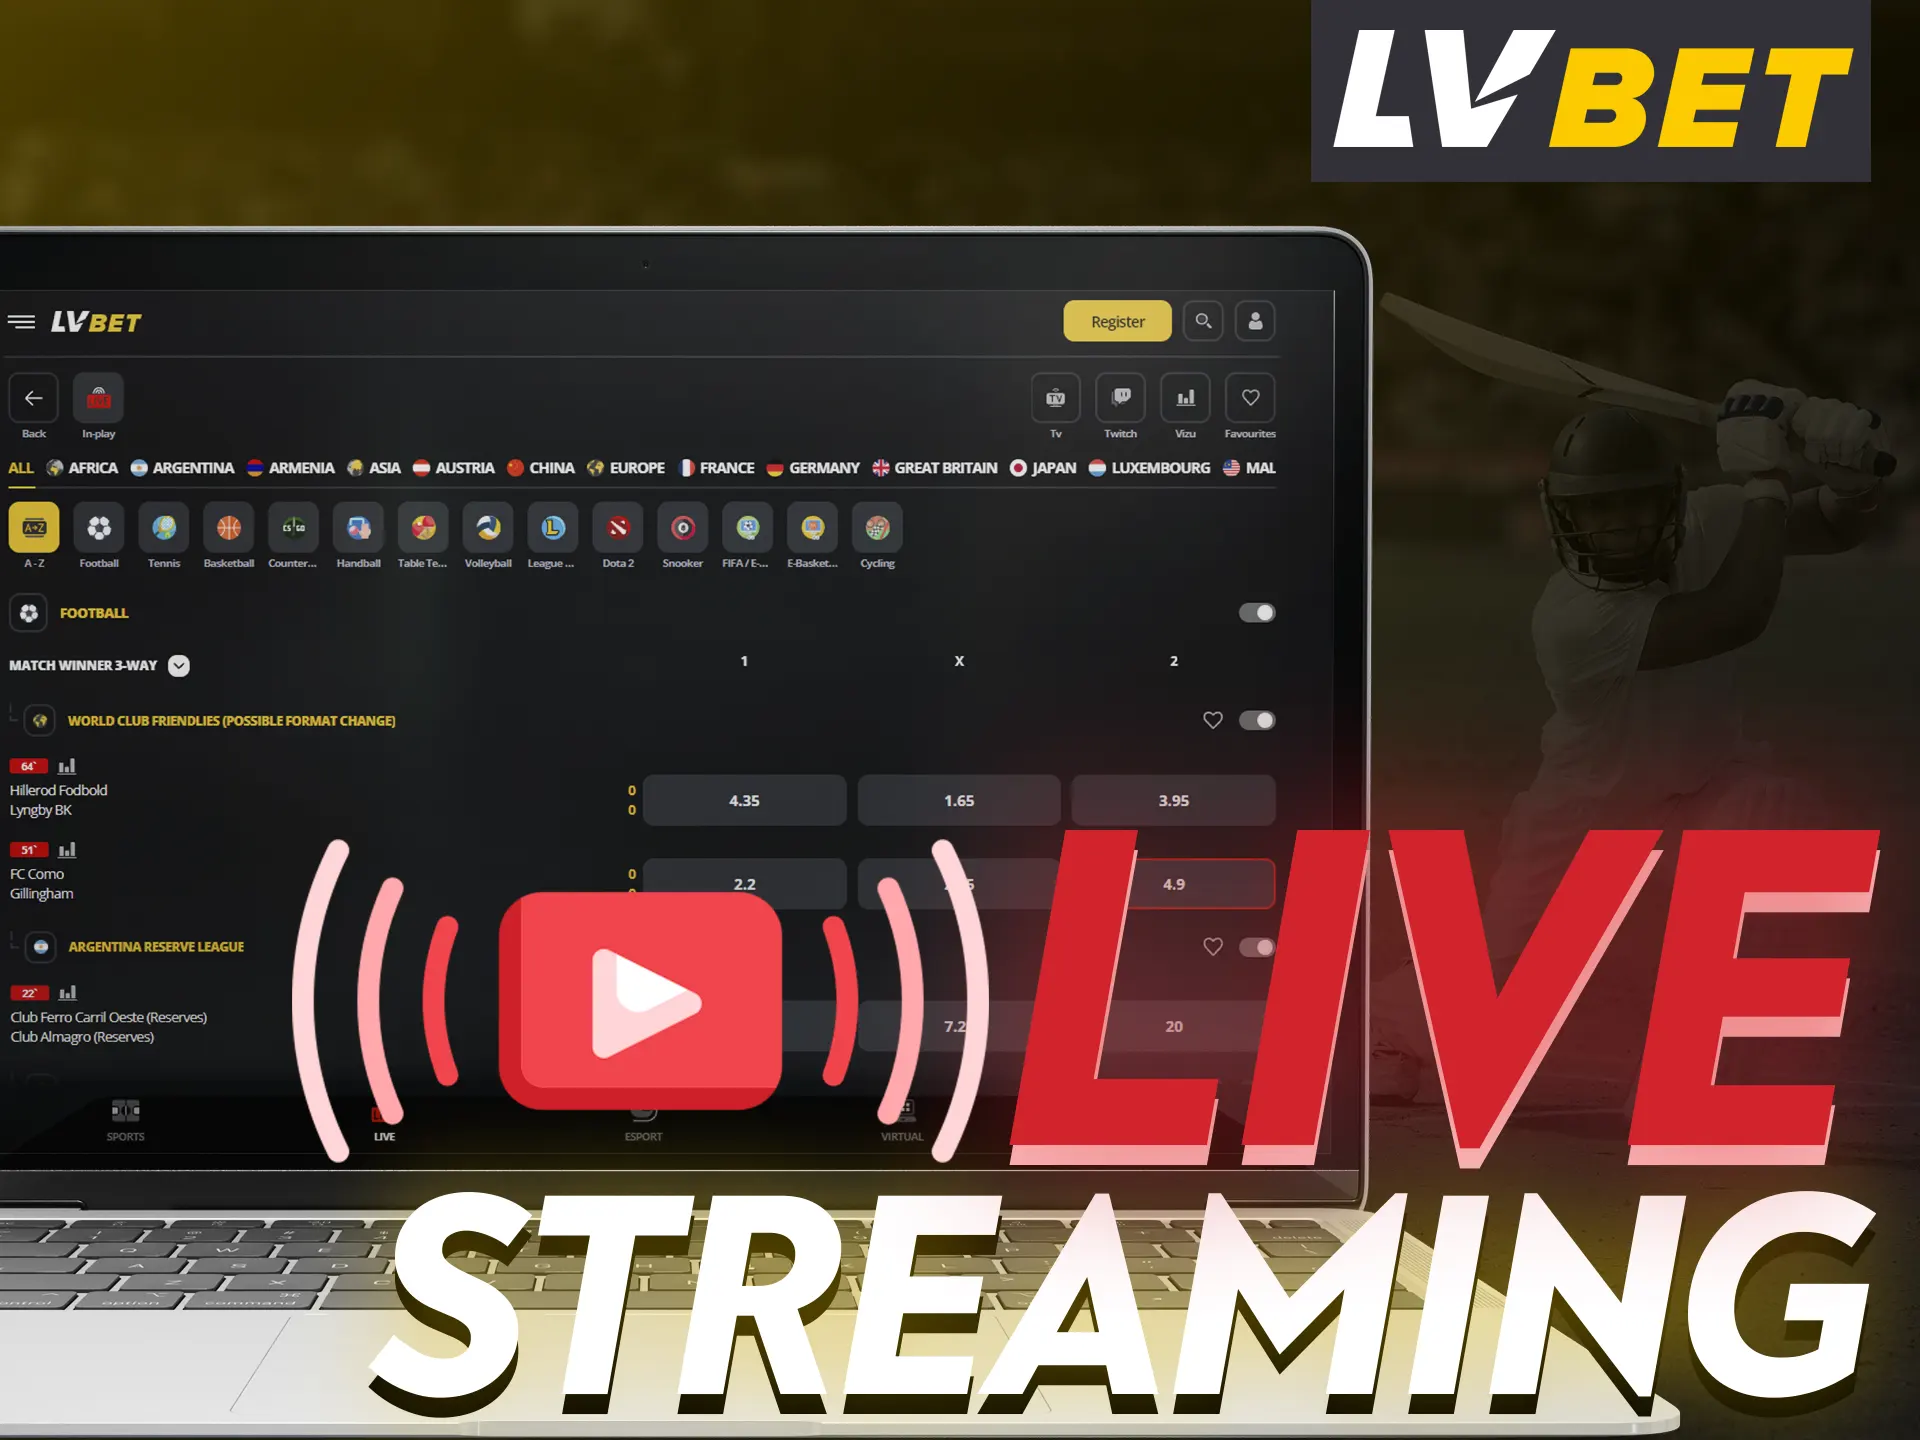 Watch match streaming with LV Bet.